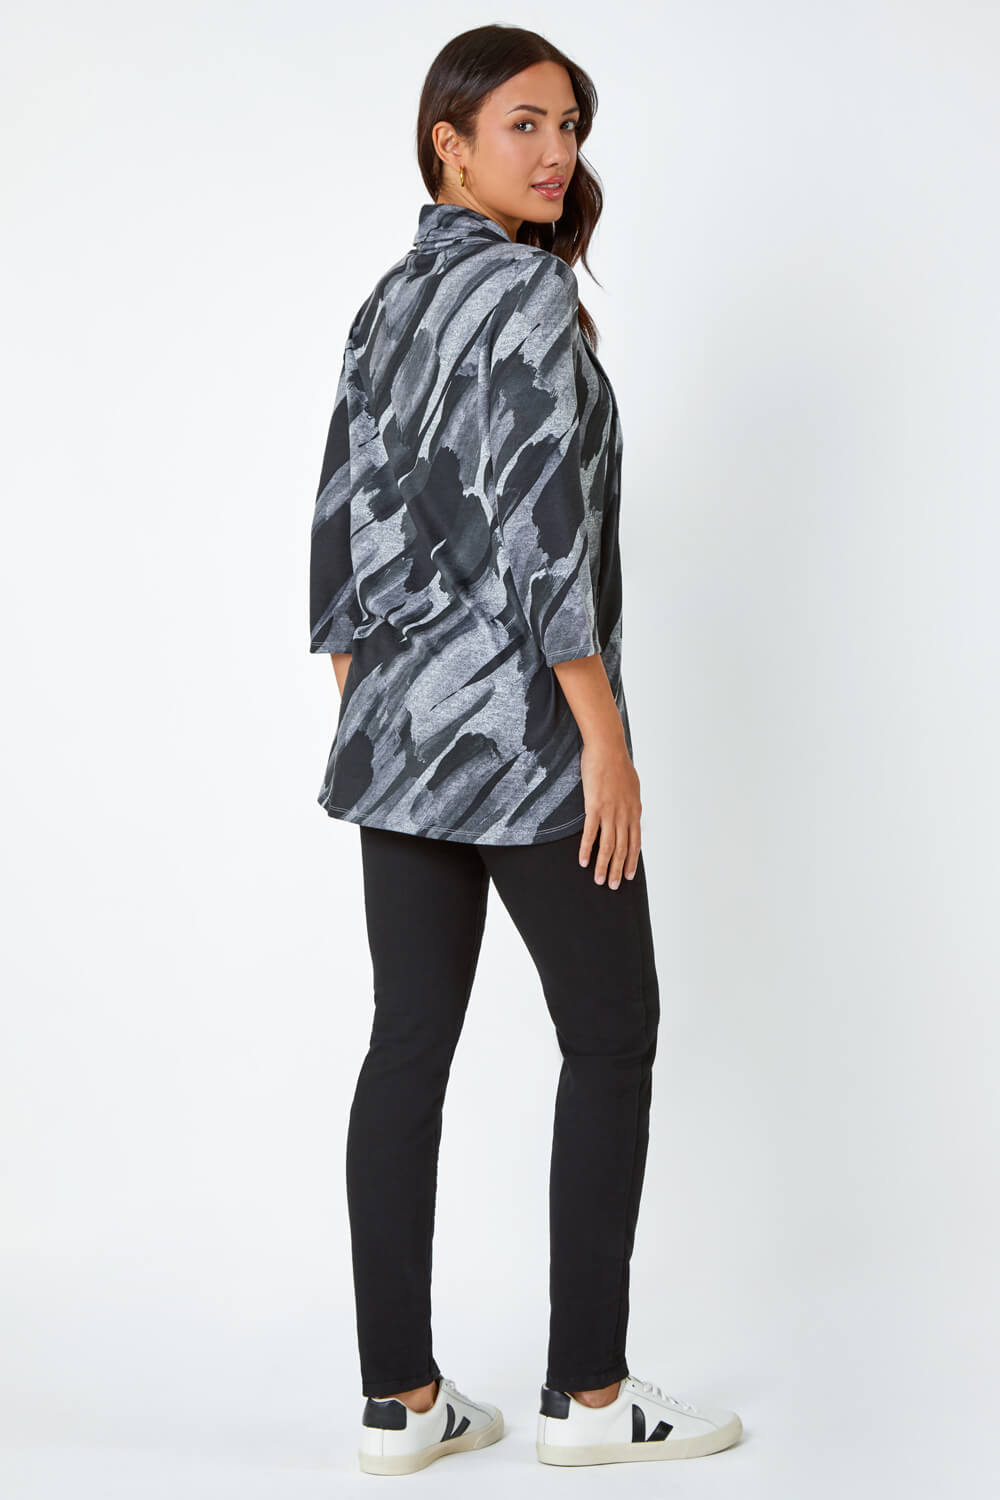 Charcoal Abstract Print Pocket Top with Snood, Image 3 of 5